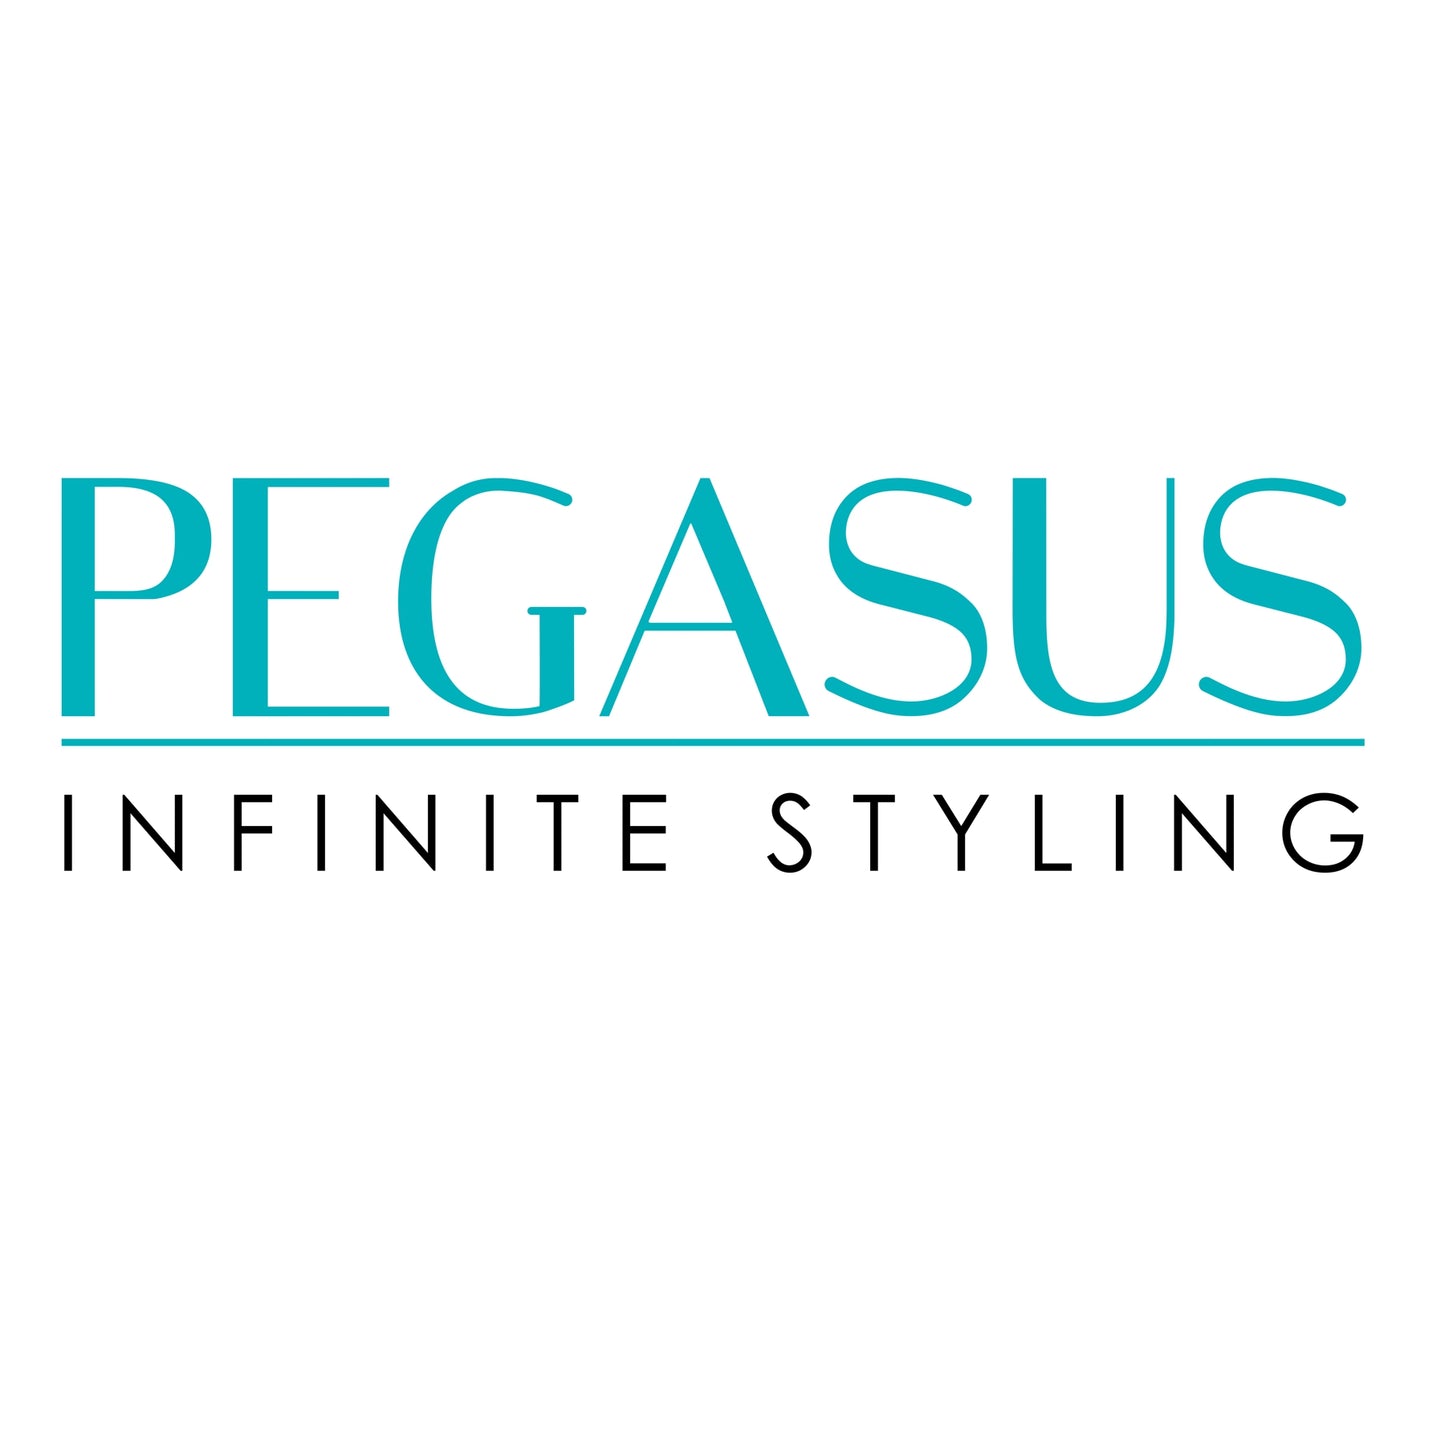 Pegasus MICOLOR 123, 9.75in Hard Rubber Fine Tooth Pintail Comb, Seamless, Anti Static, Heat and Chemically Resistant, Stainless Steel Pin, Great for Parting, Coloring Hair | Peines de goma dura - Gold